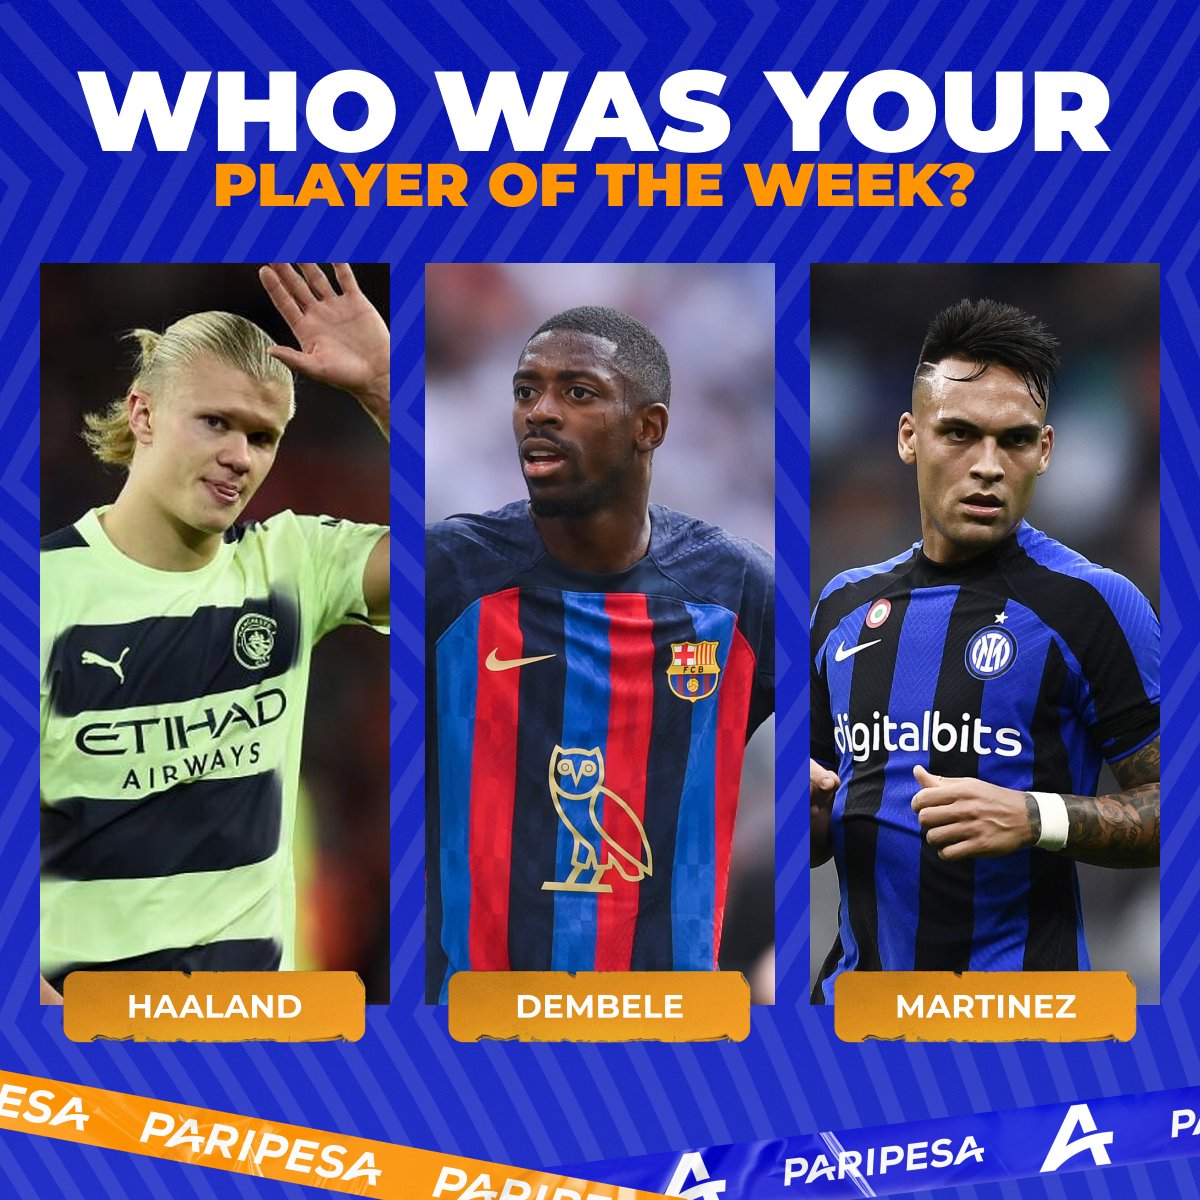 🔴🟡🟢 Three leagues and three attacking “monsters”! ☝ But you can choose only one Player of the Week! #potw